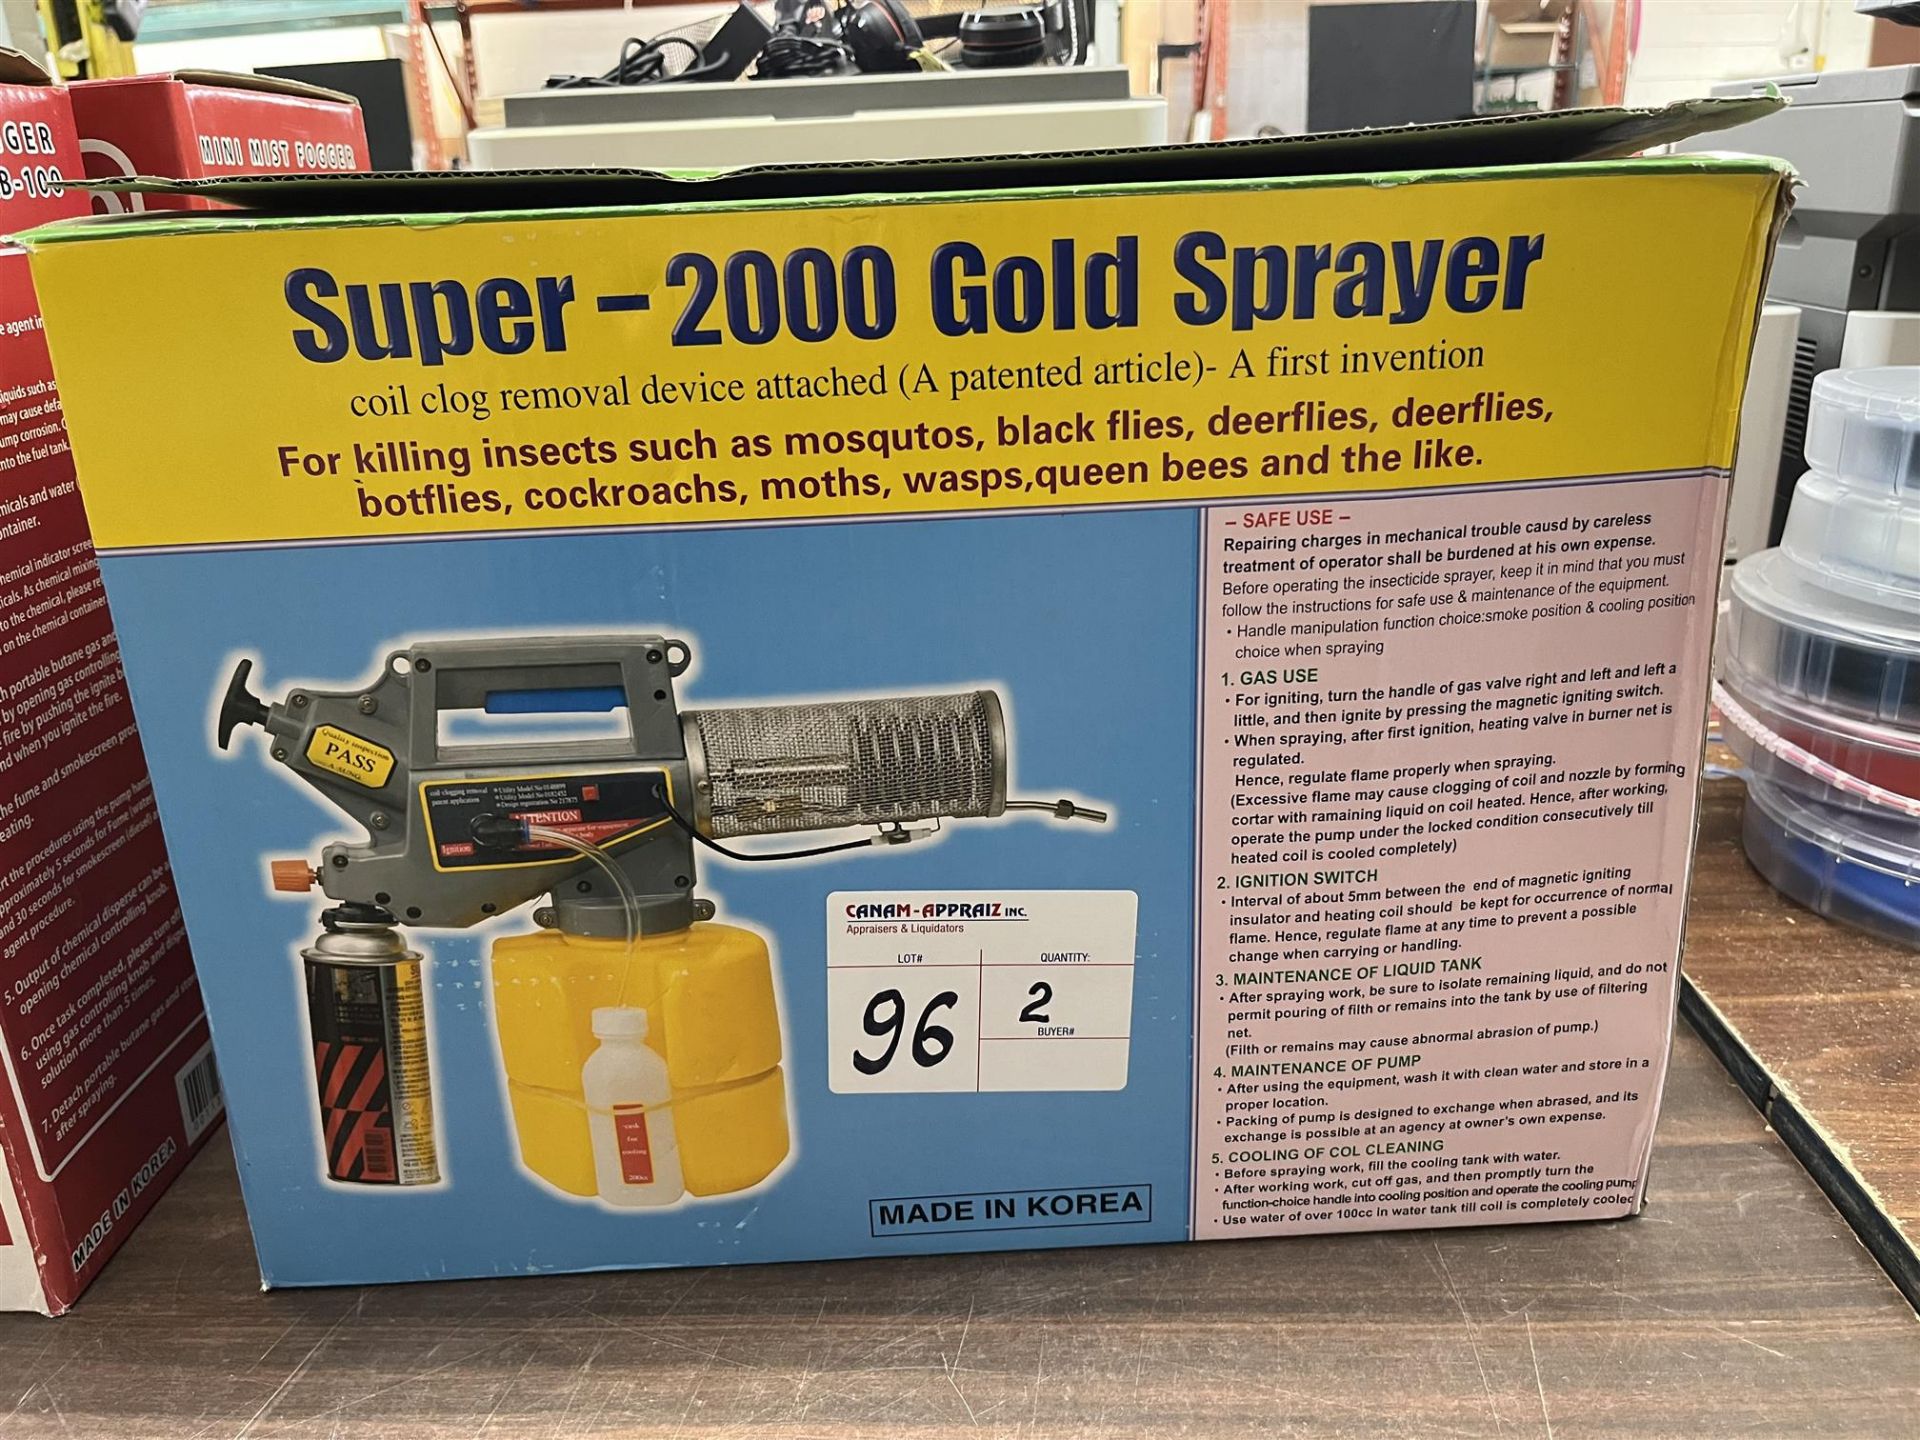 Super 200 Gold Sprayer for killing insects such as mosqutos, black flies, deer flies: Quantity 2